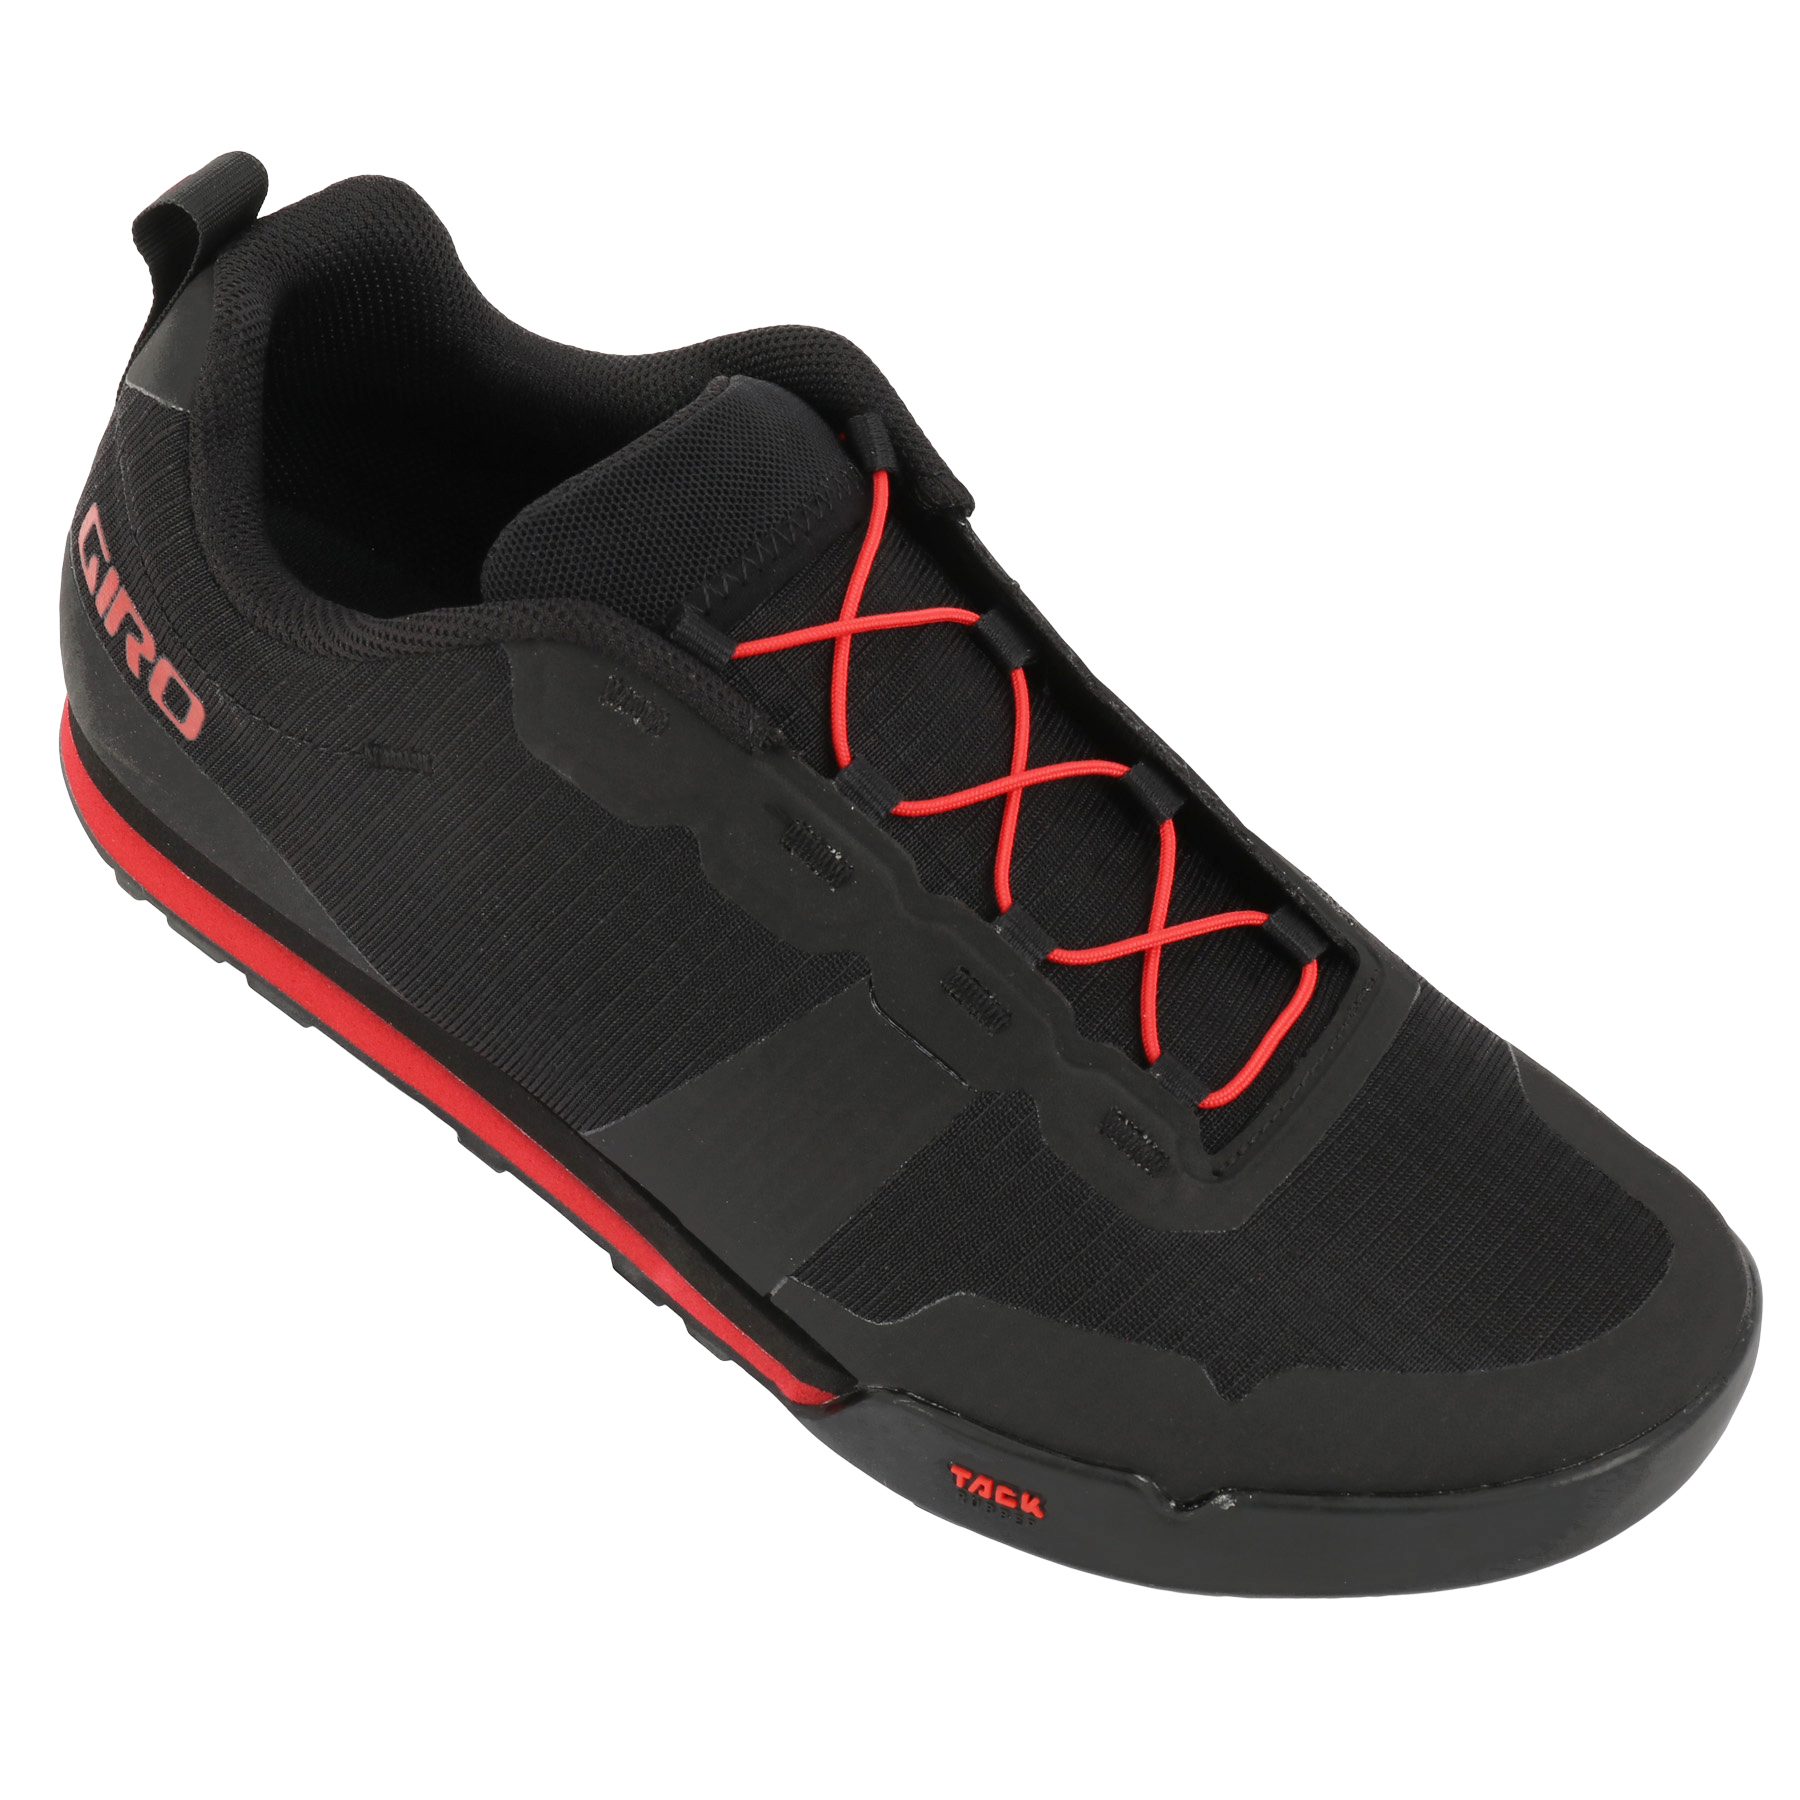 Photo produit de Giro Chaussures Homme - Tracker Fastlace Flatpedal - black/bright red